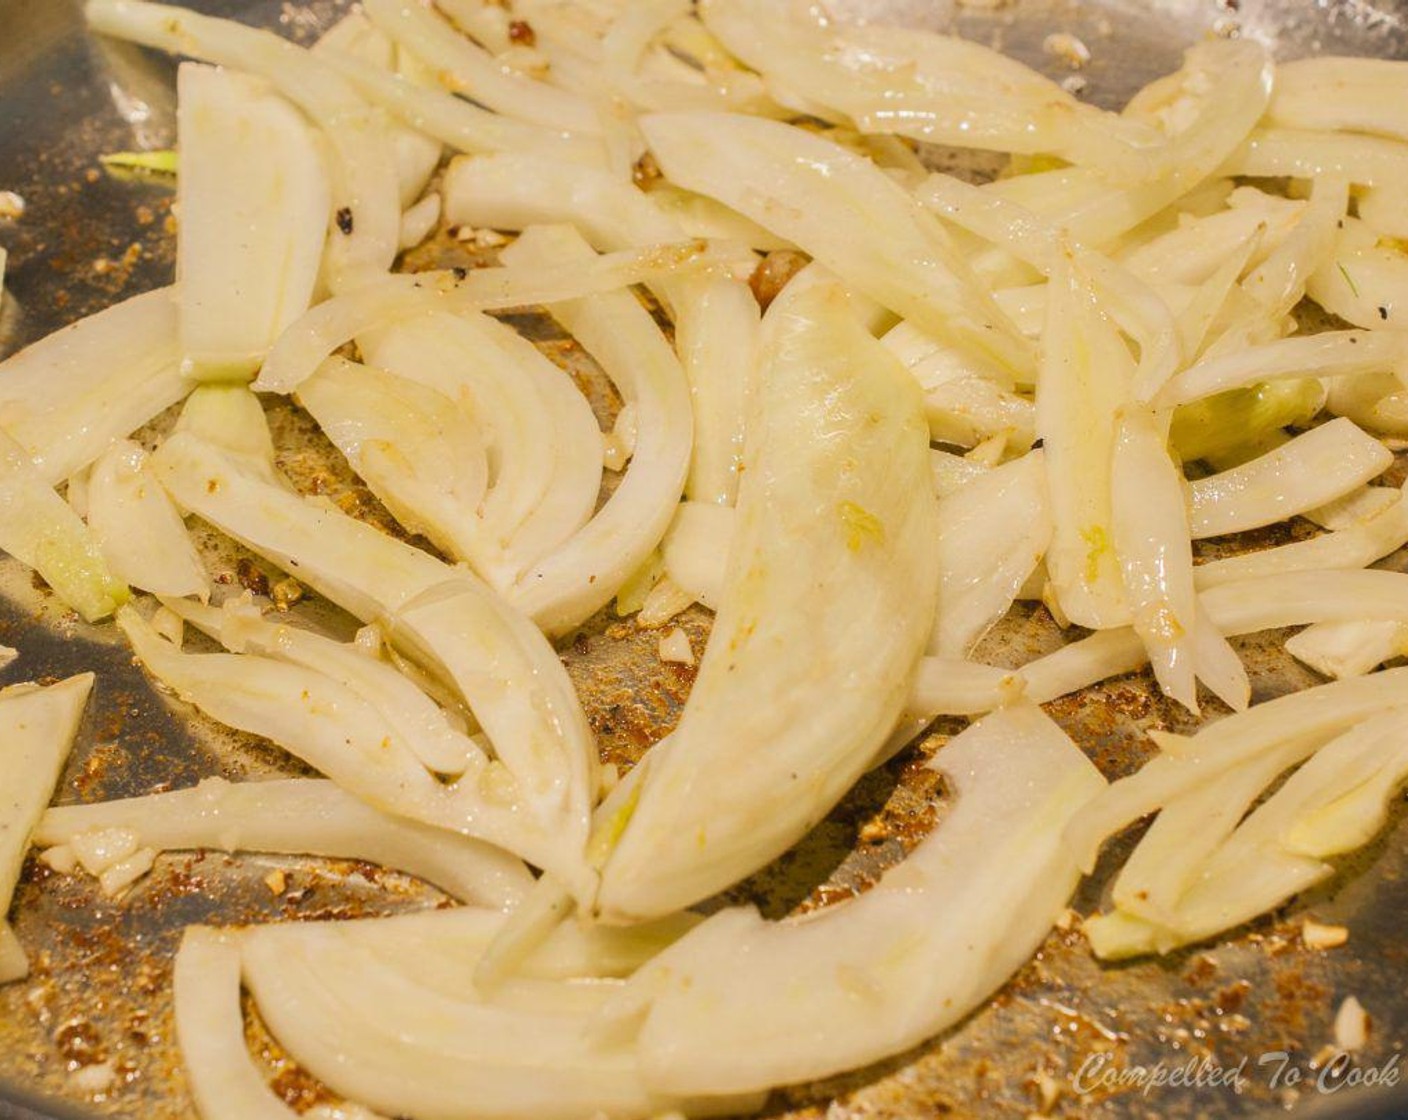 step 5 Add Fennel Bulb (1 bulb) and Garlic (2 cloves) and sauté 2 to 3 minutes over medium heat. Deglaze skillet by adding White Wine (1/2 cup) and scraping the bottom of the pan to loosen any browned bits.